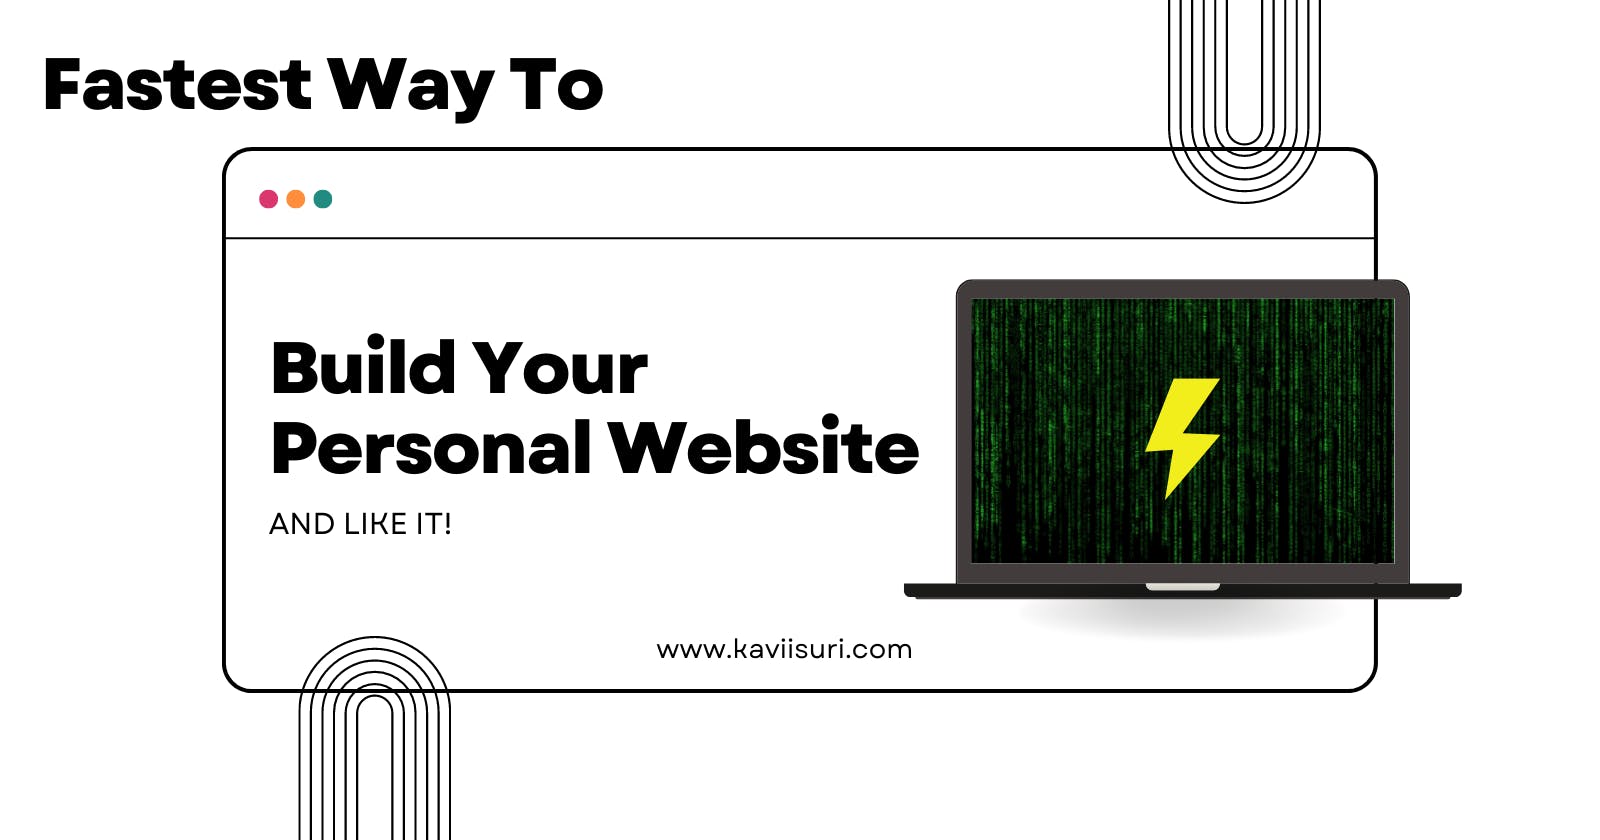 The Fastest way to build your personal website and like it!